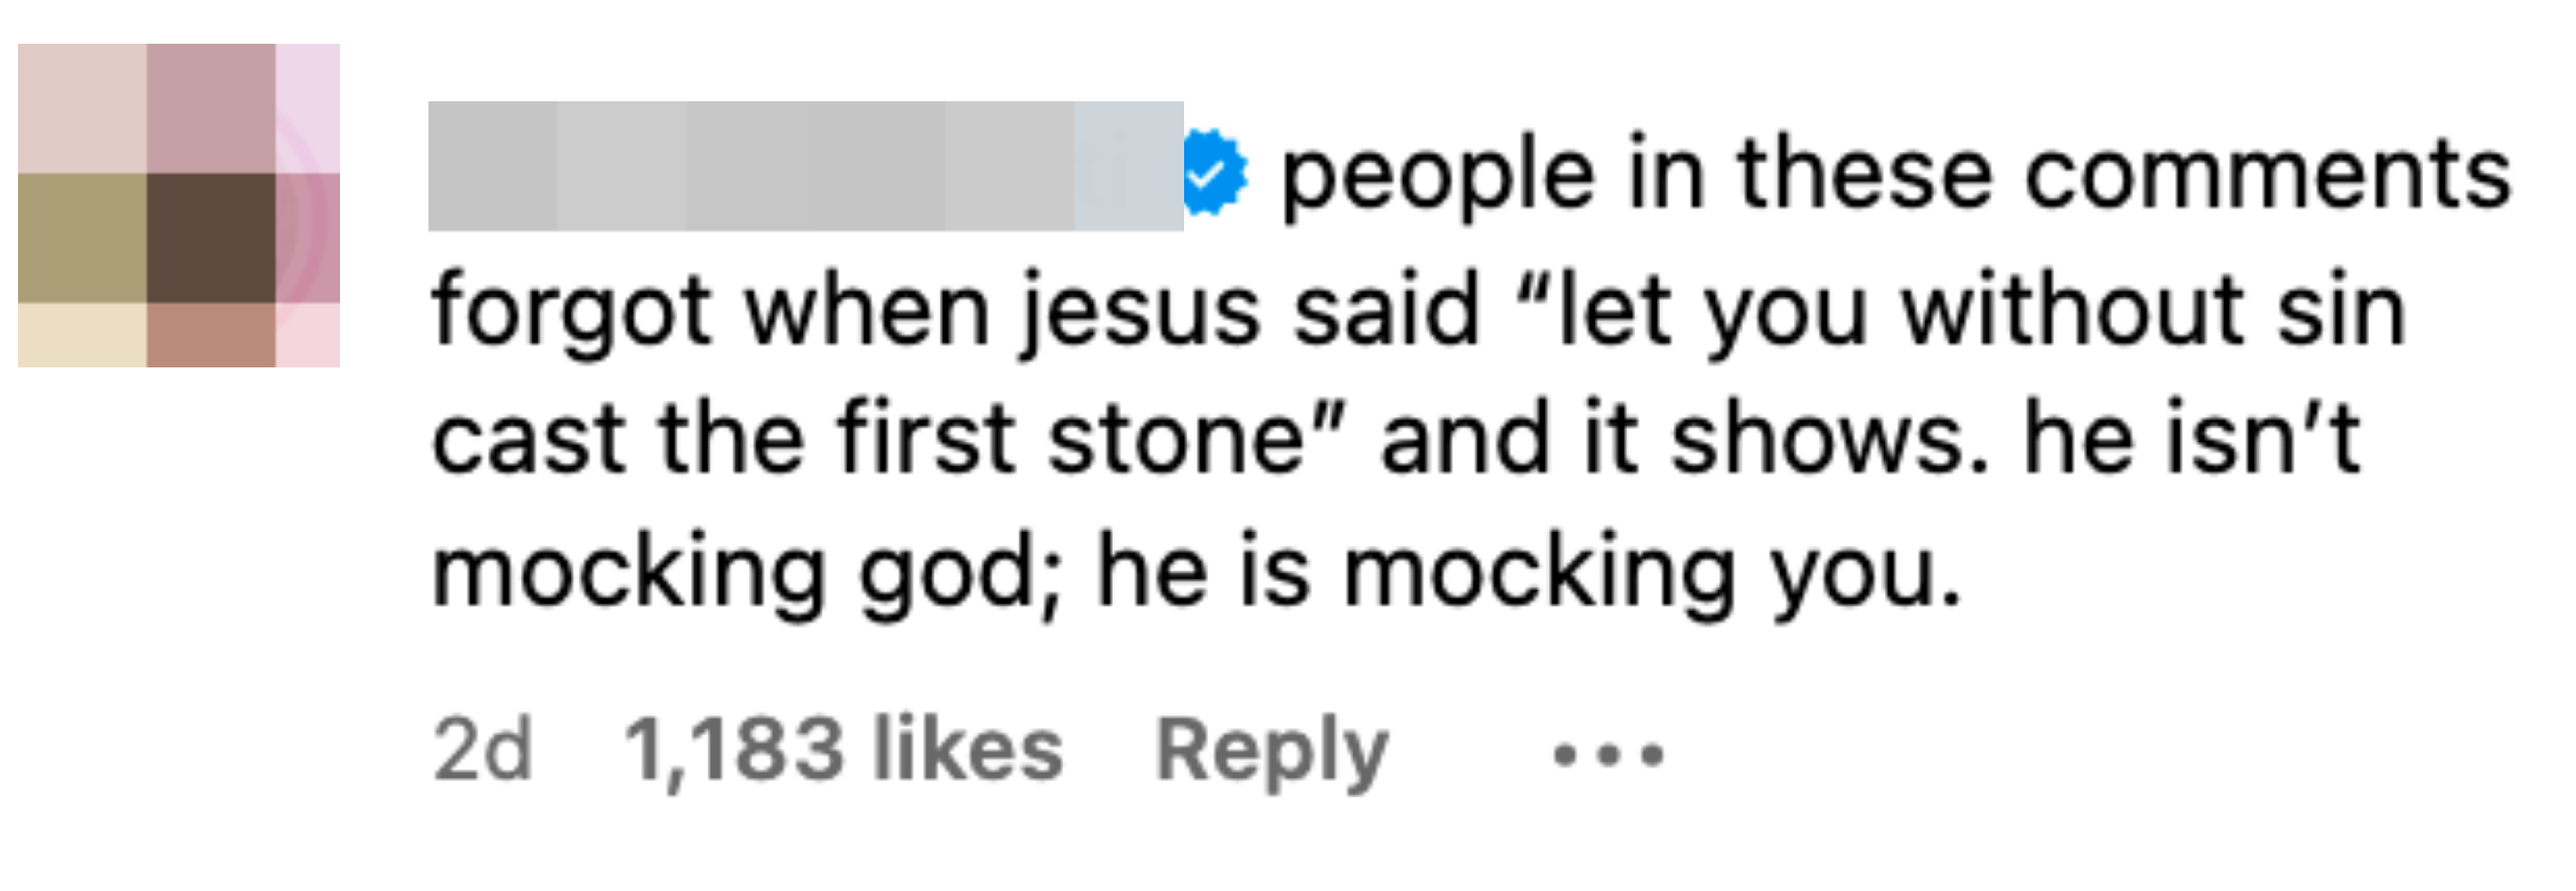 People in these comments forget when Jesus said let you without sin cast the fist stone and it shows